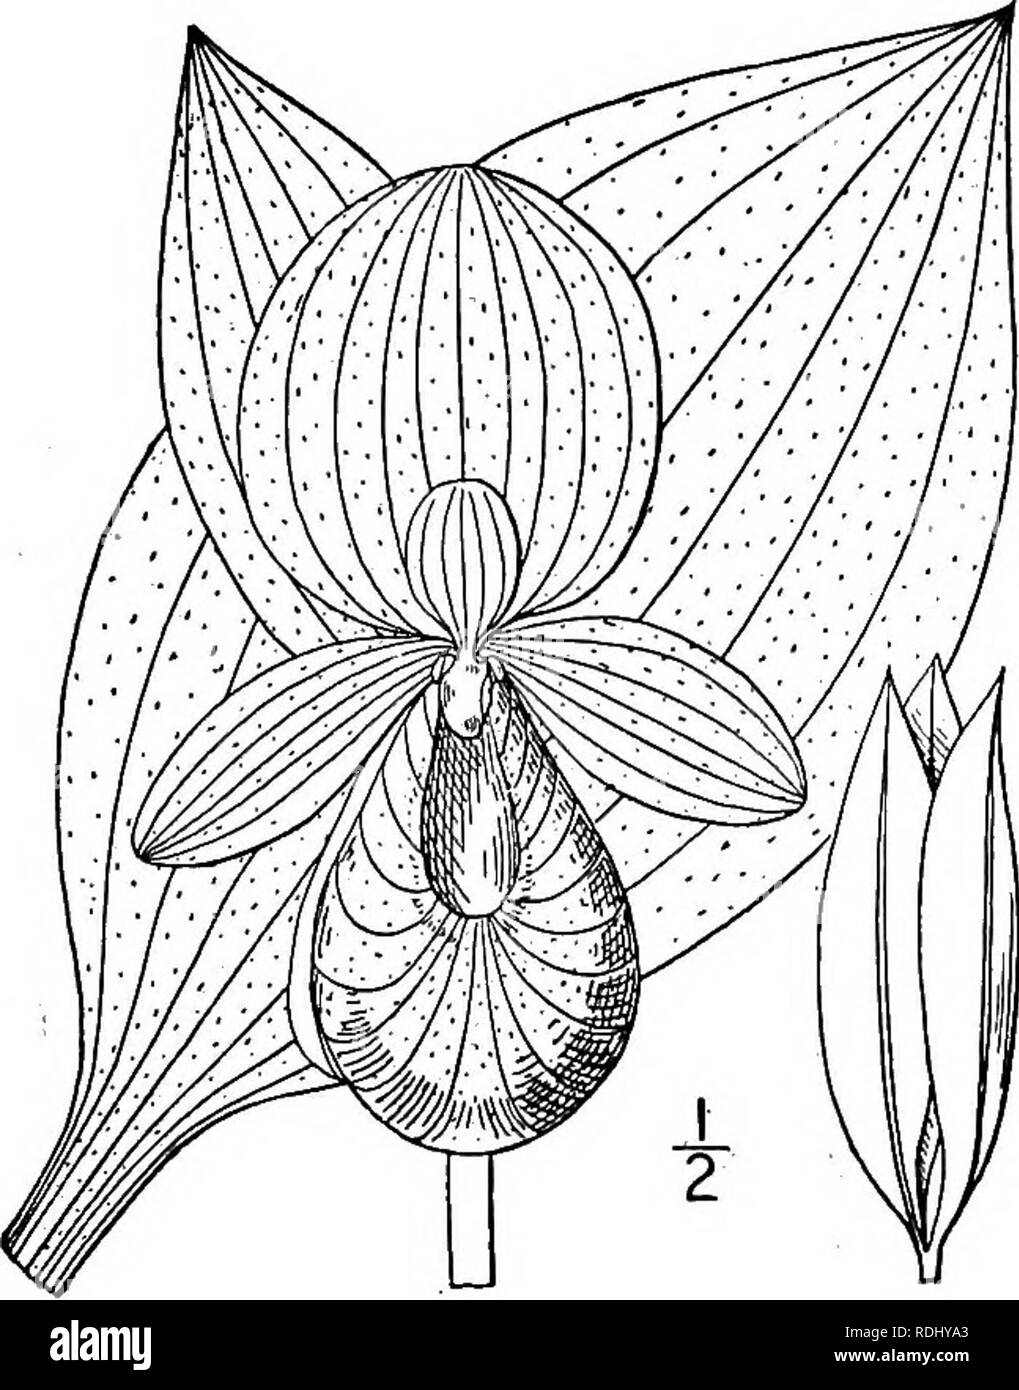 . An illustrated flora of the northern United States, Canada and the British possessions, from Newfoundland to the parallel of the southern boundary of Virginia, and from the Atlantic Ocean westward to the 102d meridian. Botany; Botany. 3. Cypripedium reginae Walt. Showy Ladies'-slipper. Fig. 1356. fC. hirsutum Mill. Gard. Diet. Ed. 8, no. 3. 1768. Cypripedium reginae Walt. Fl. Car. 222. 1788. Cypripedium album Ait. Hort. Kew. 3: 303. 1789. Cypripedium spectabile Salisb. Trans. Linn. Soc. 1: 78. 1791. Stem stout, villous-hirsute,. i°-2j° high, leafy to the top. Leaves elliptic, acute, 3'-/ lon Stock Photo